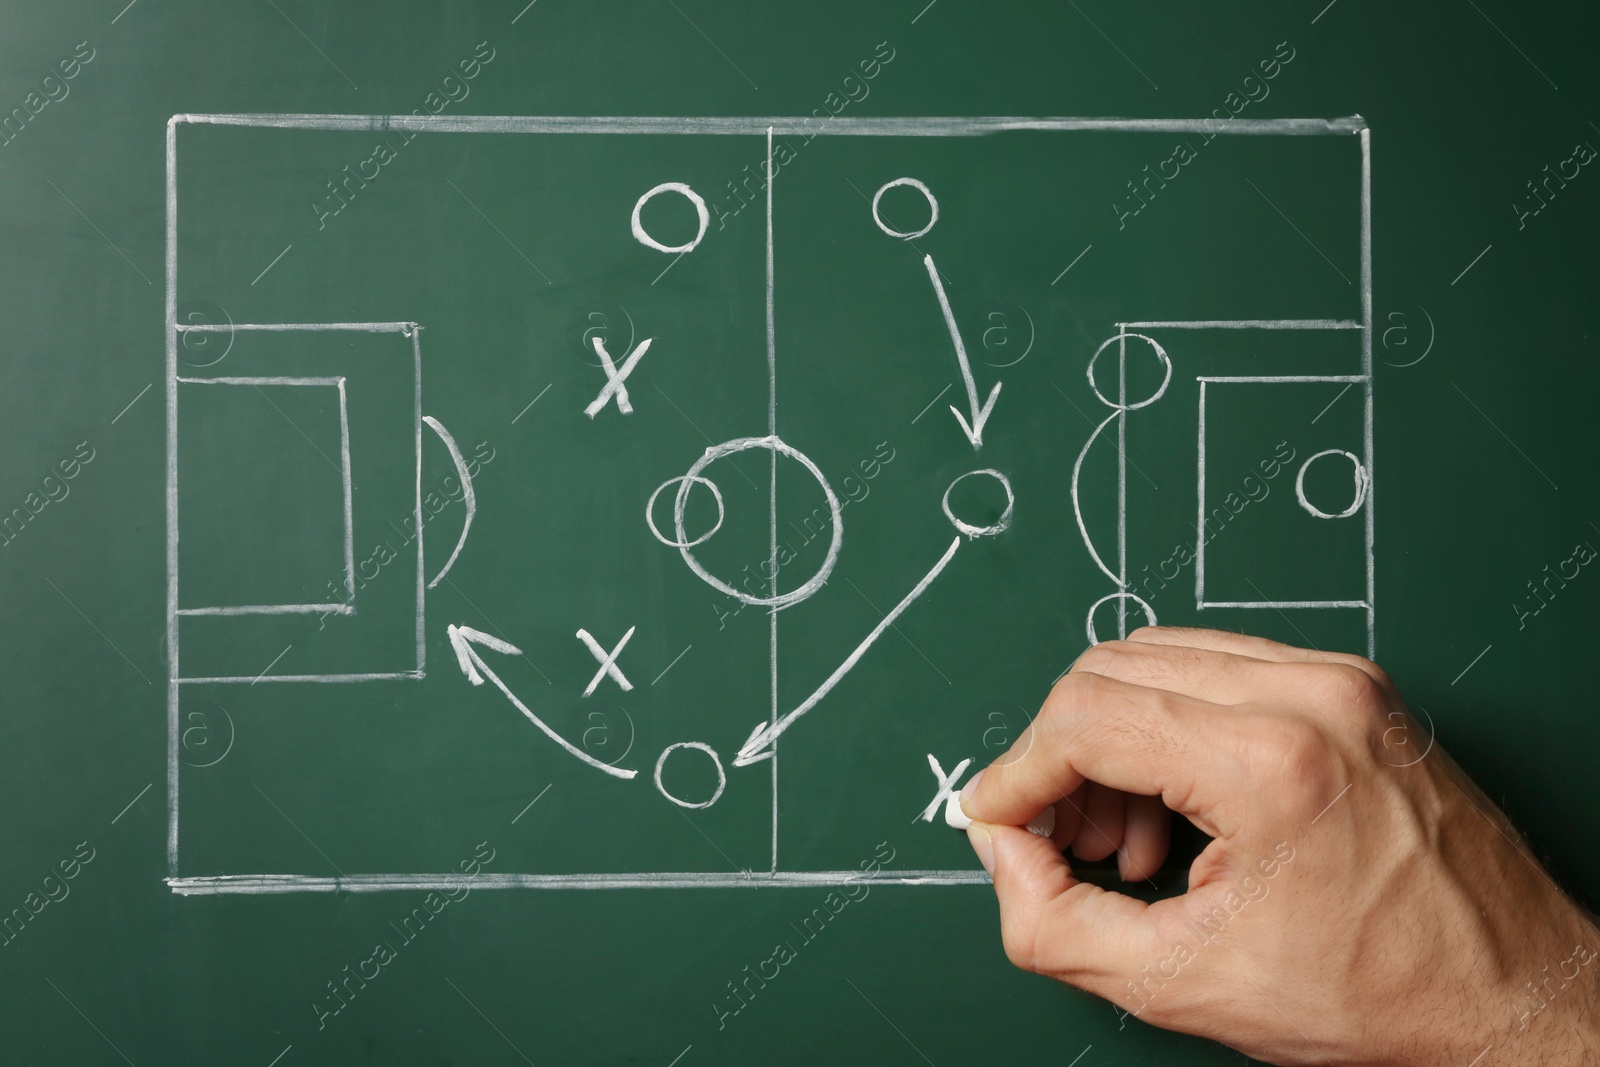 Photo of Man drawing football game scheme on chalkboard, top view